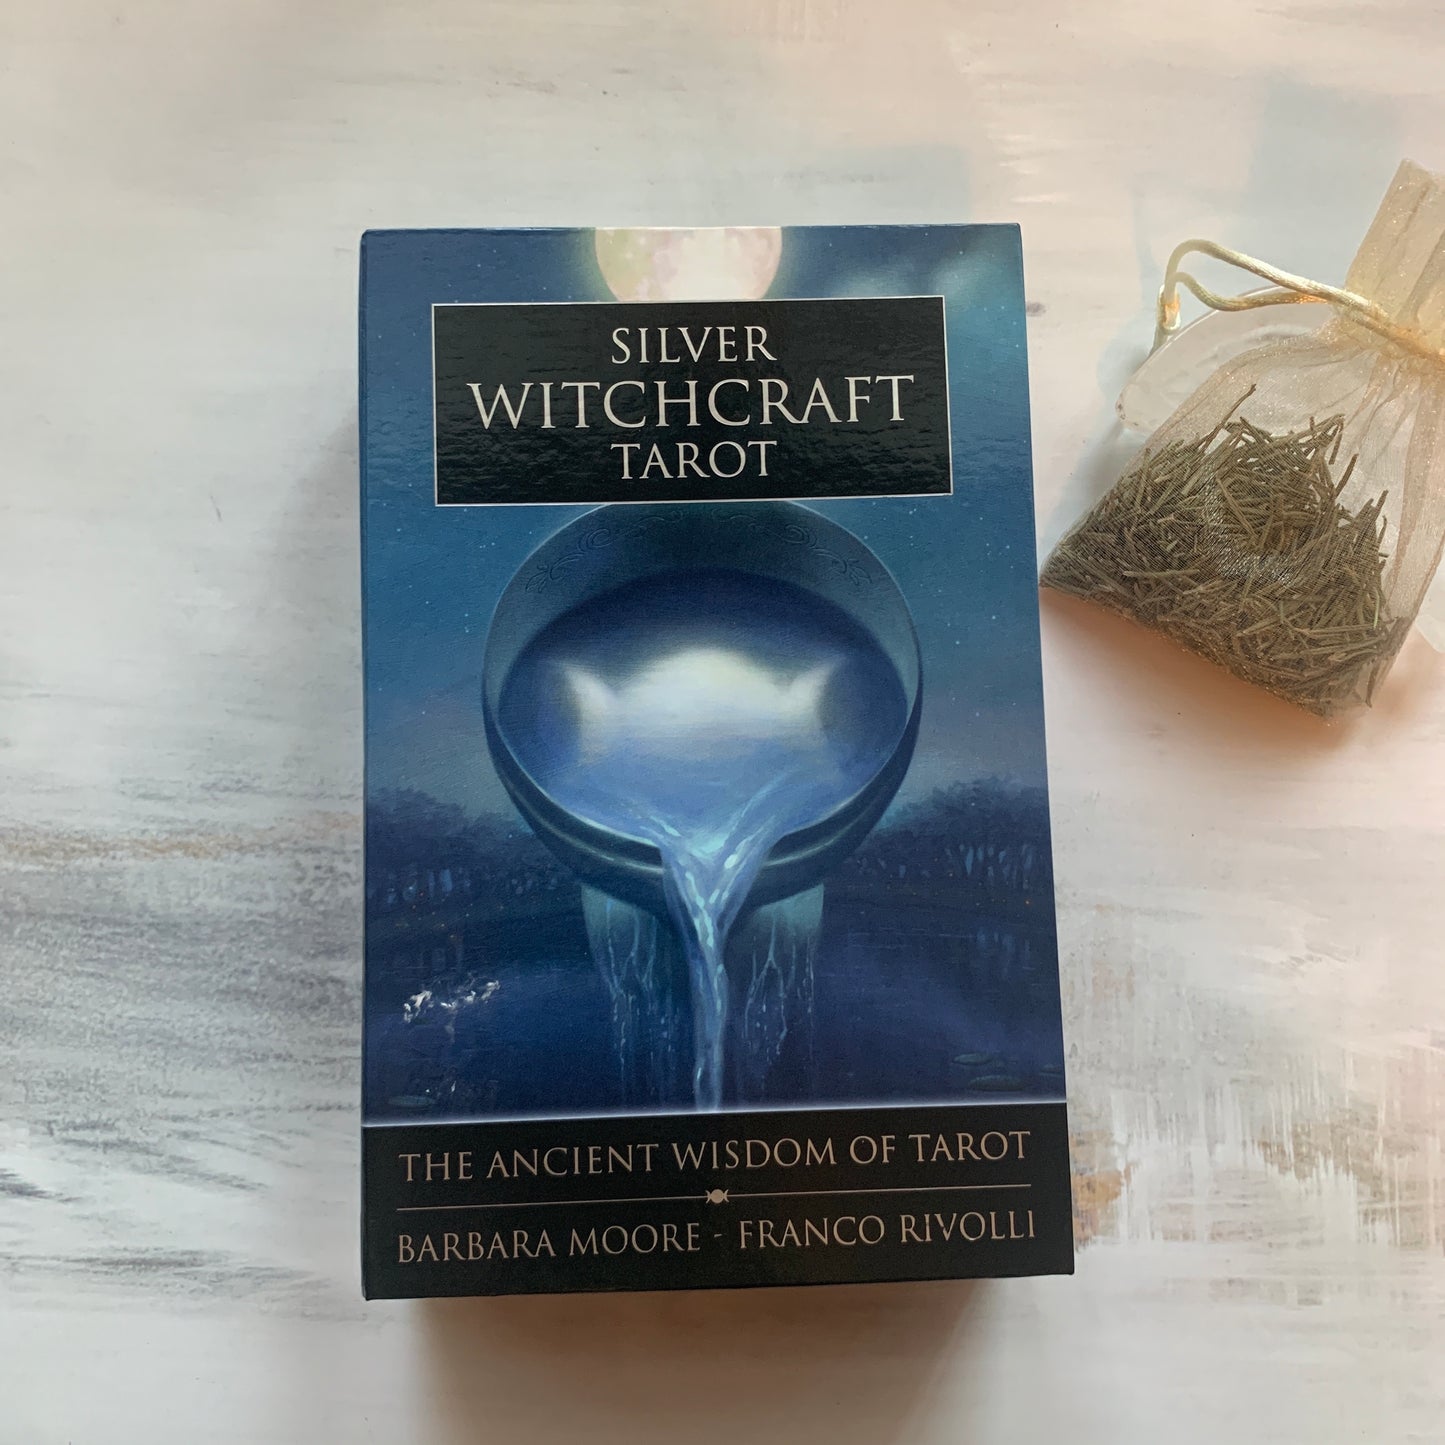 Silver Witchcraft Tarot Deck by Barbara Moore and Franco Rivolli